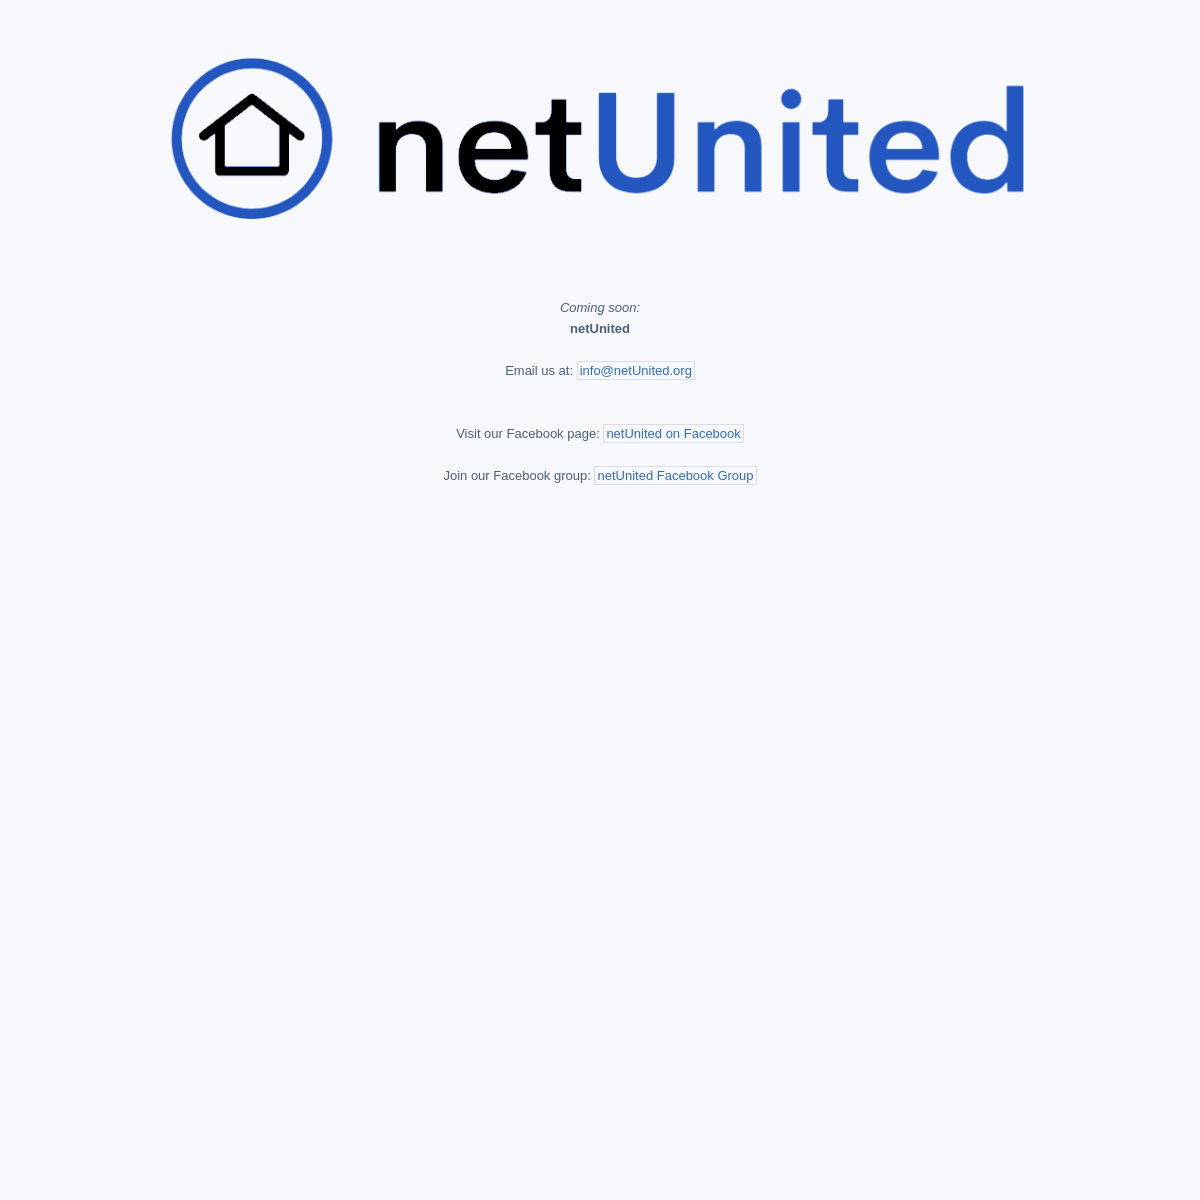 A complete backup of netunited.org